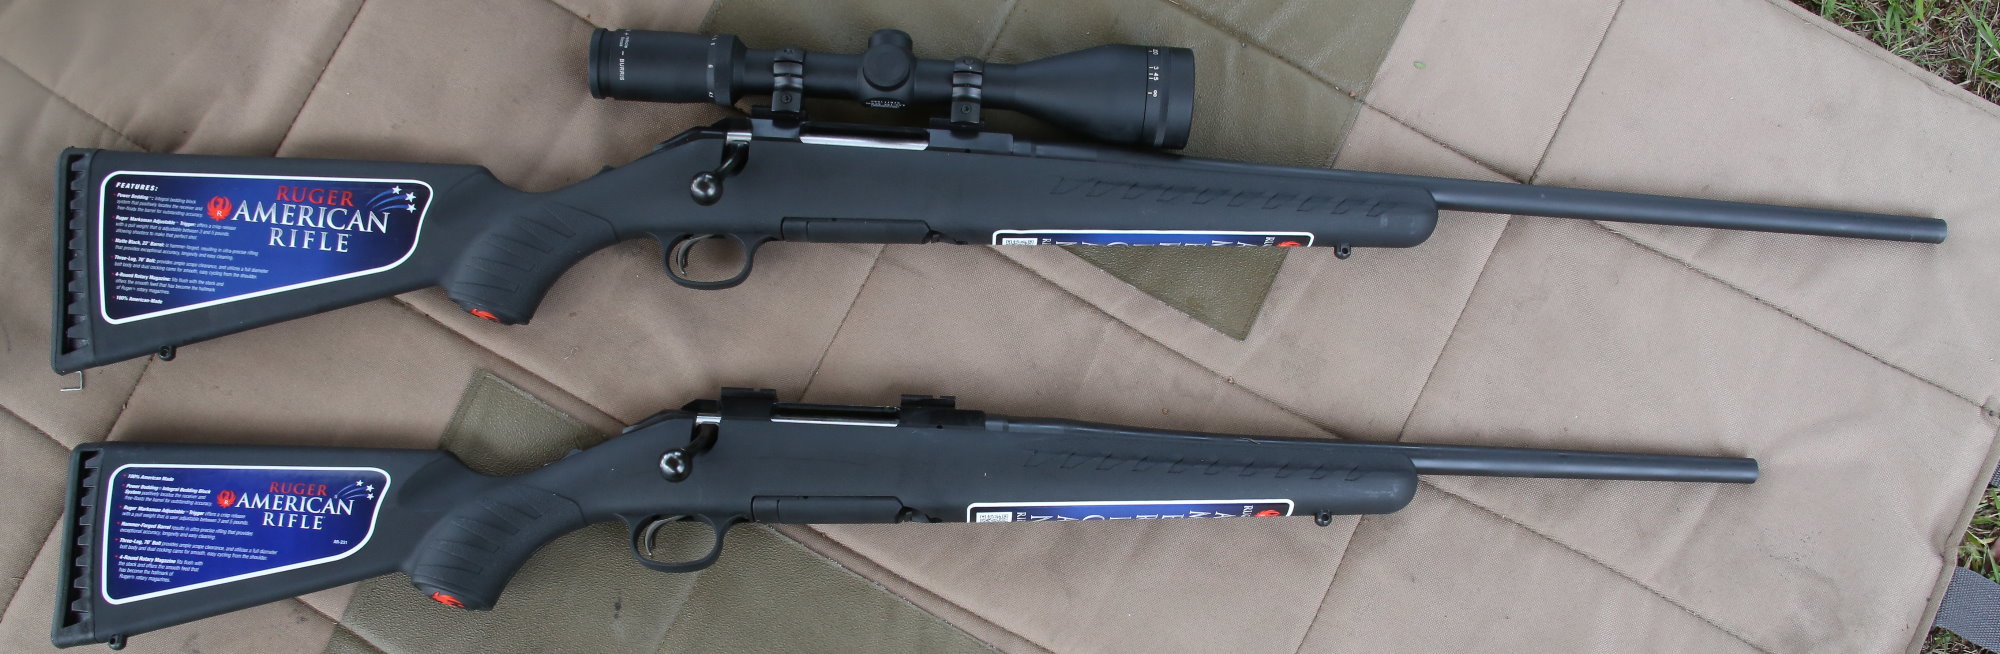 ruger-american-rifle-223-standard-compact-new-gun-review-shot